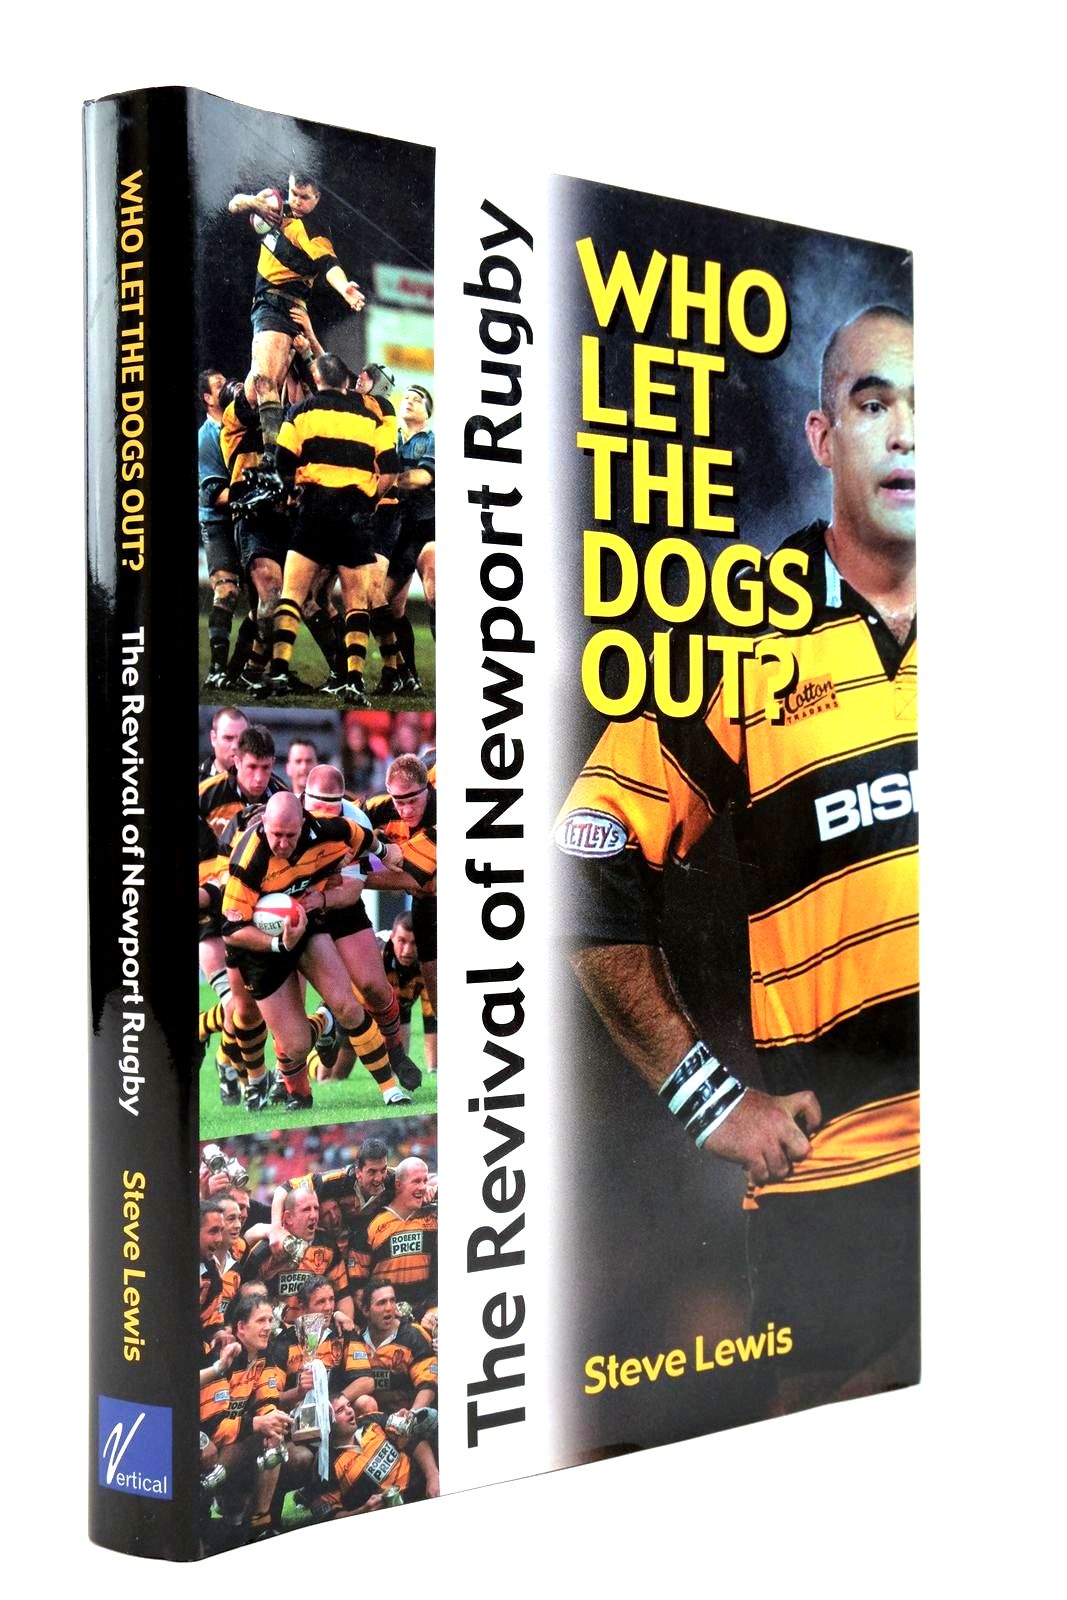 Photo of WHO LET THE DOGS OUT? THE REVIVAL OF NEWPORT RUGBY written by Lewis, Steve published by Vertical Editions (STOCK CODE: 2139294)  for sale by Stella & Rose's Books